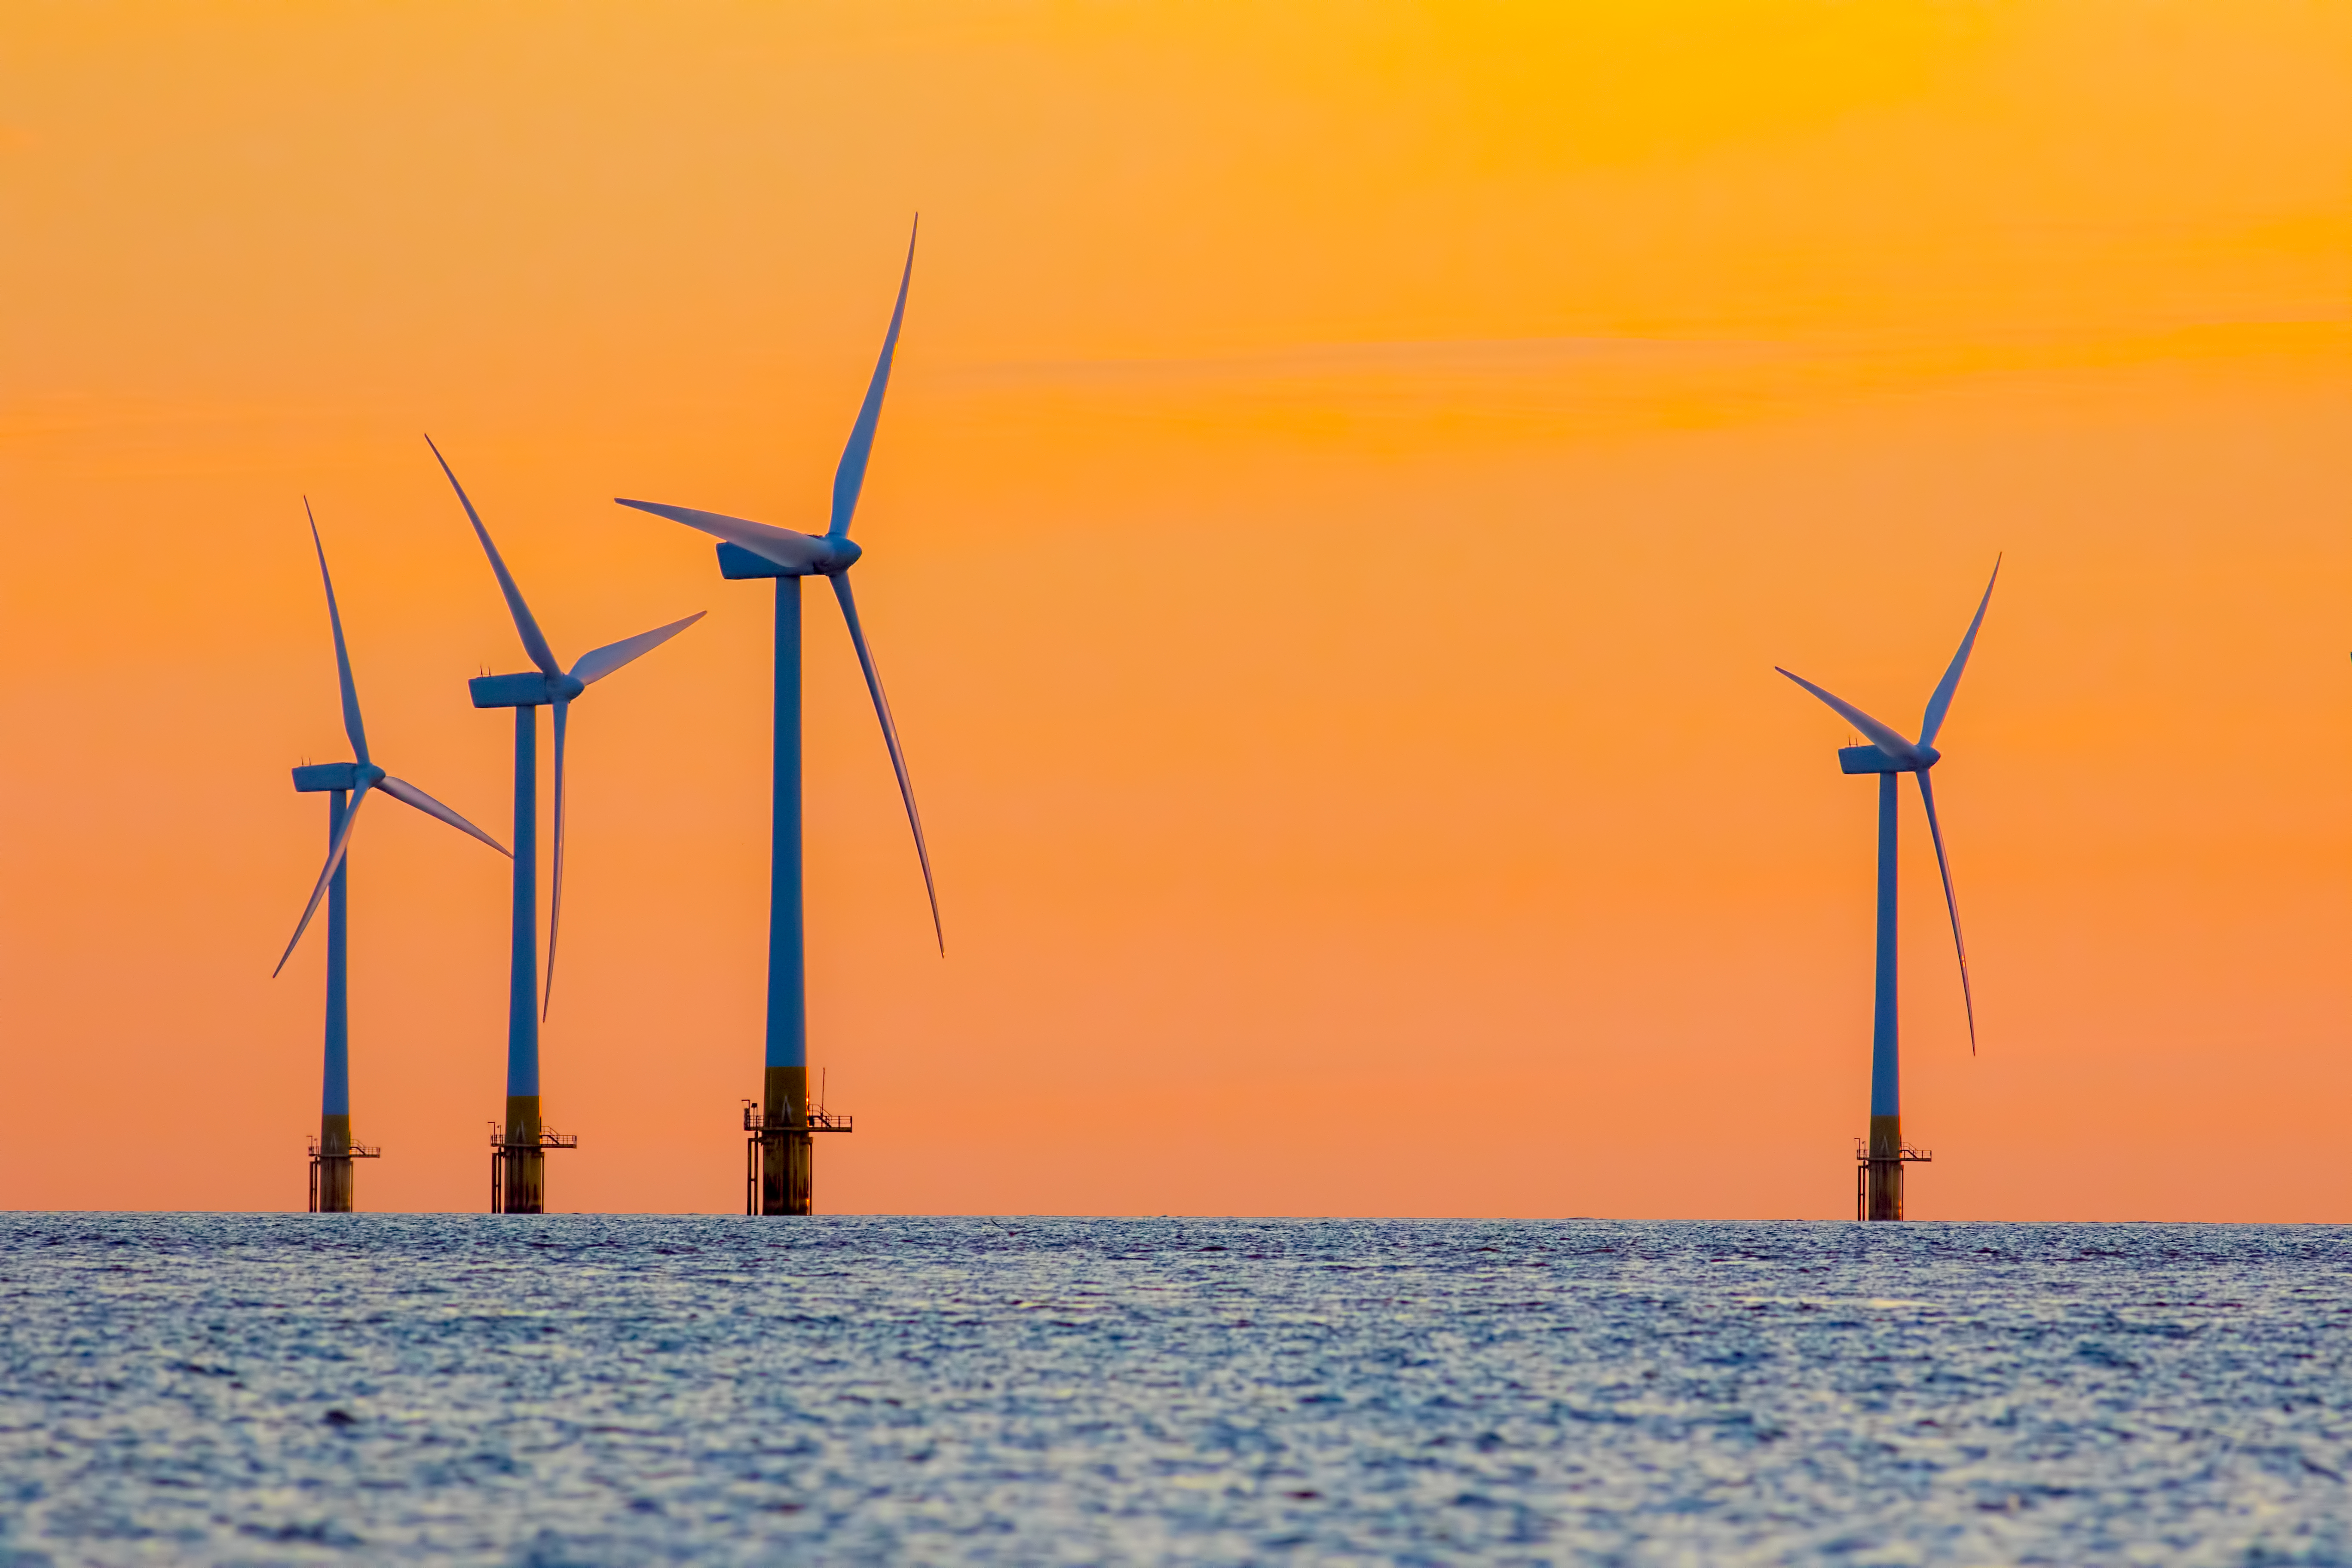 Offshore wind farm energy turbines at dawn. Surreal but natural sunrise at sea.